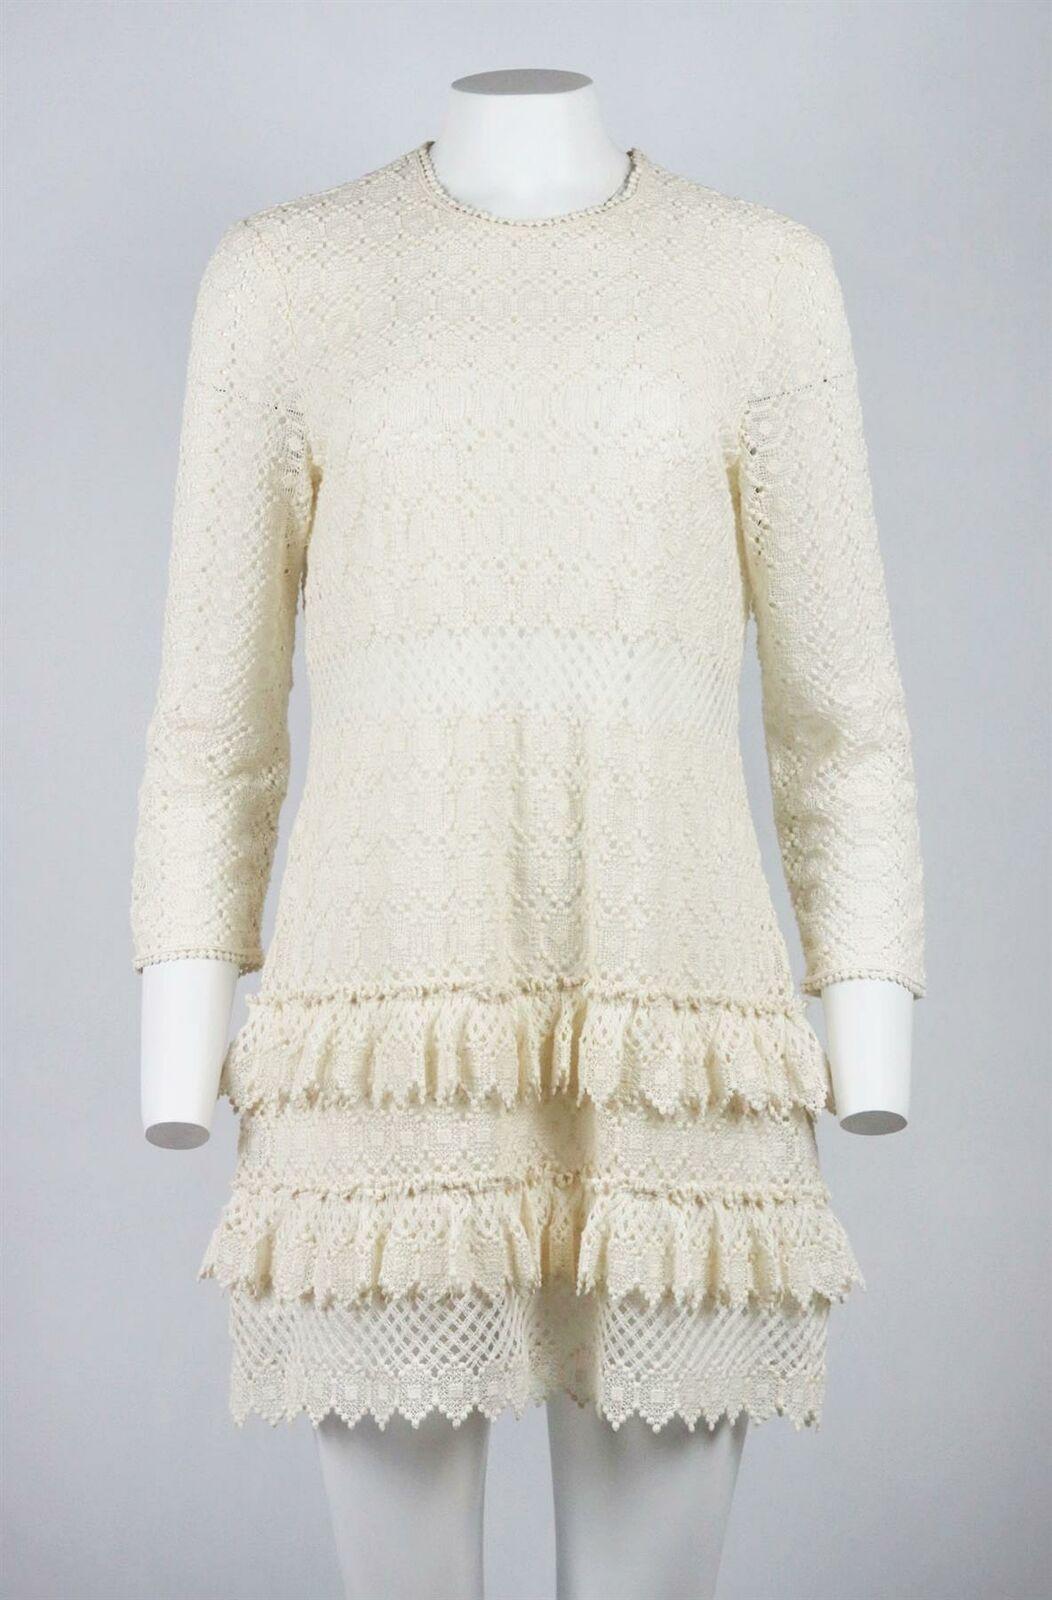 Philosophy di Lorenzo Serafini cream dress is equal parts bold and romantic, made from cotton-blend crocheted-lace, it has semi-sheer sleeves and a tiered detail that cinches your.
Cream crocheted-lace.
Zip fastening at back.
90% Cotton, 10%